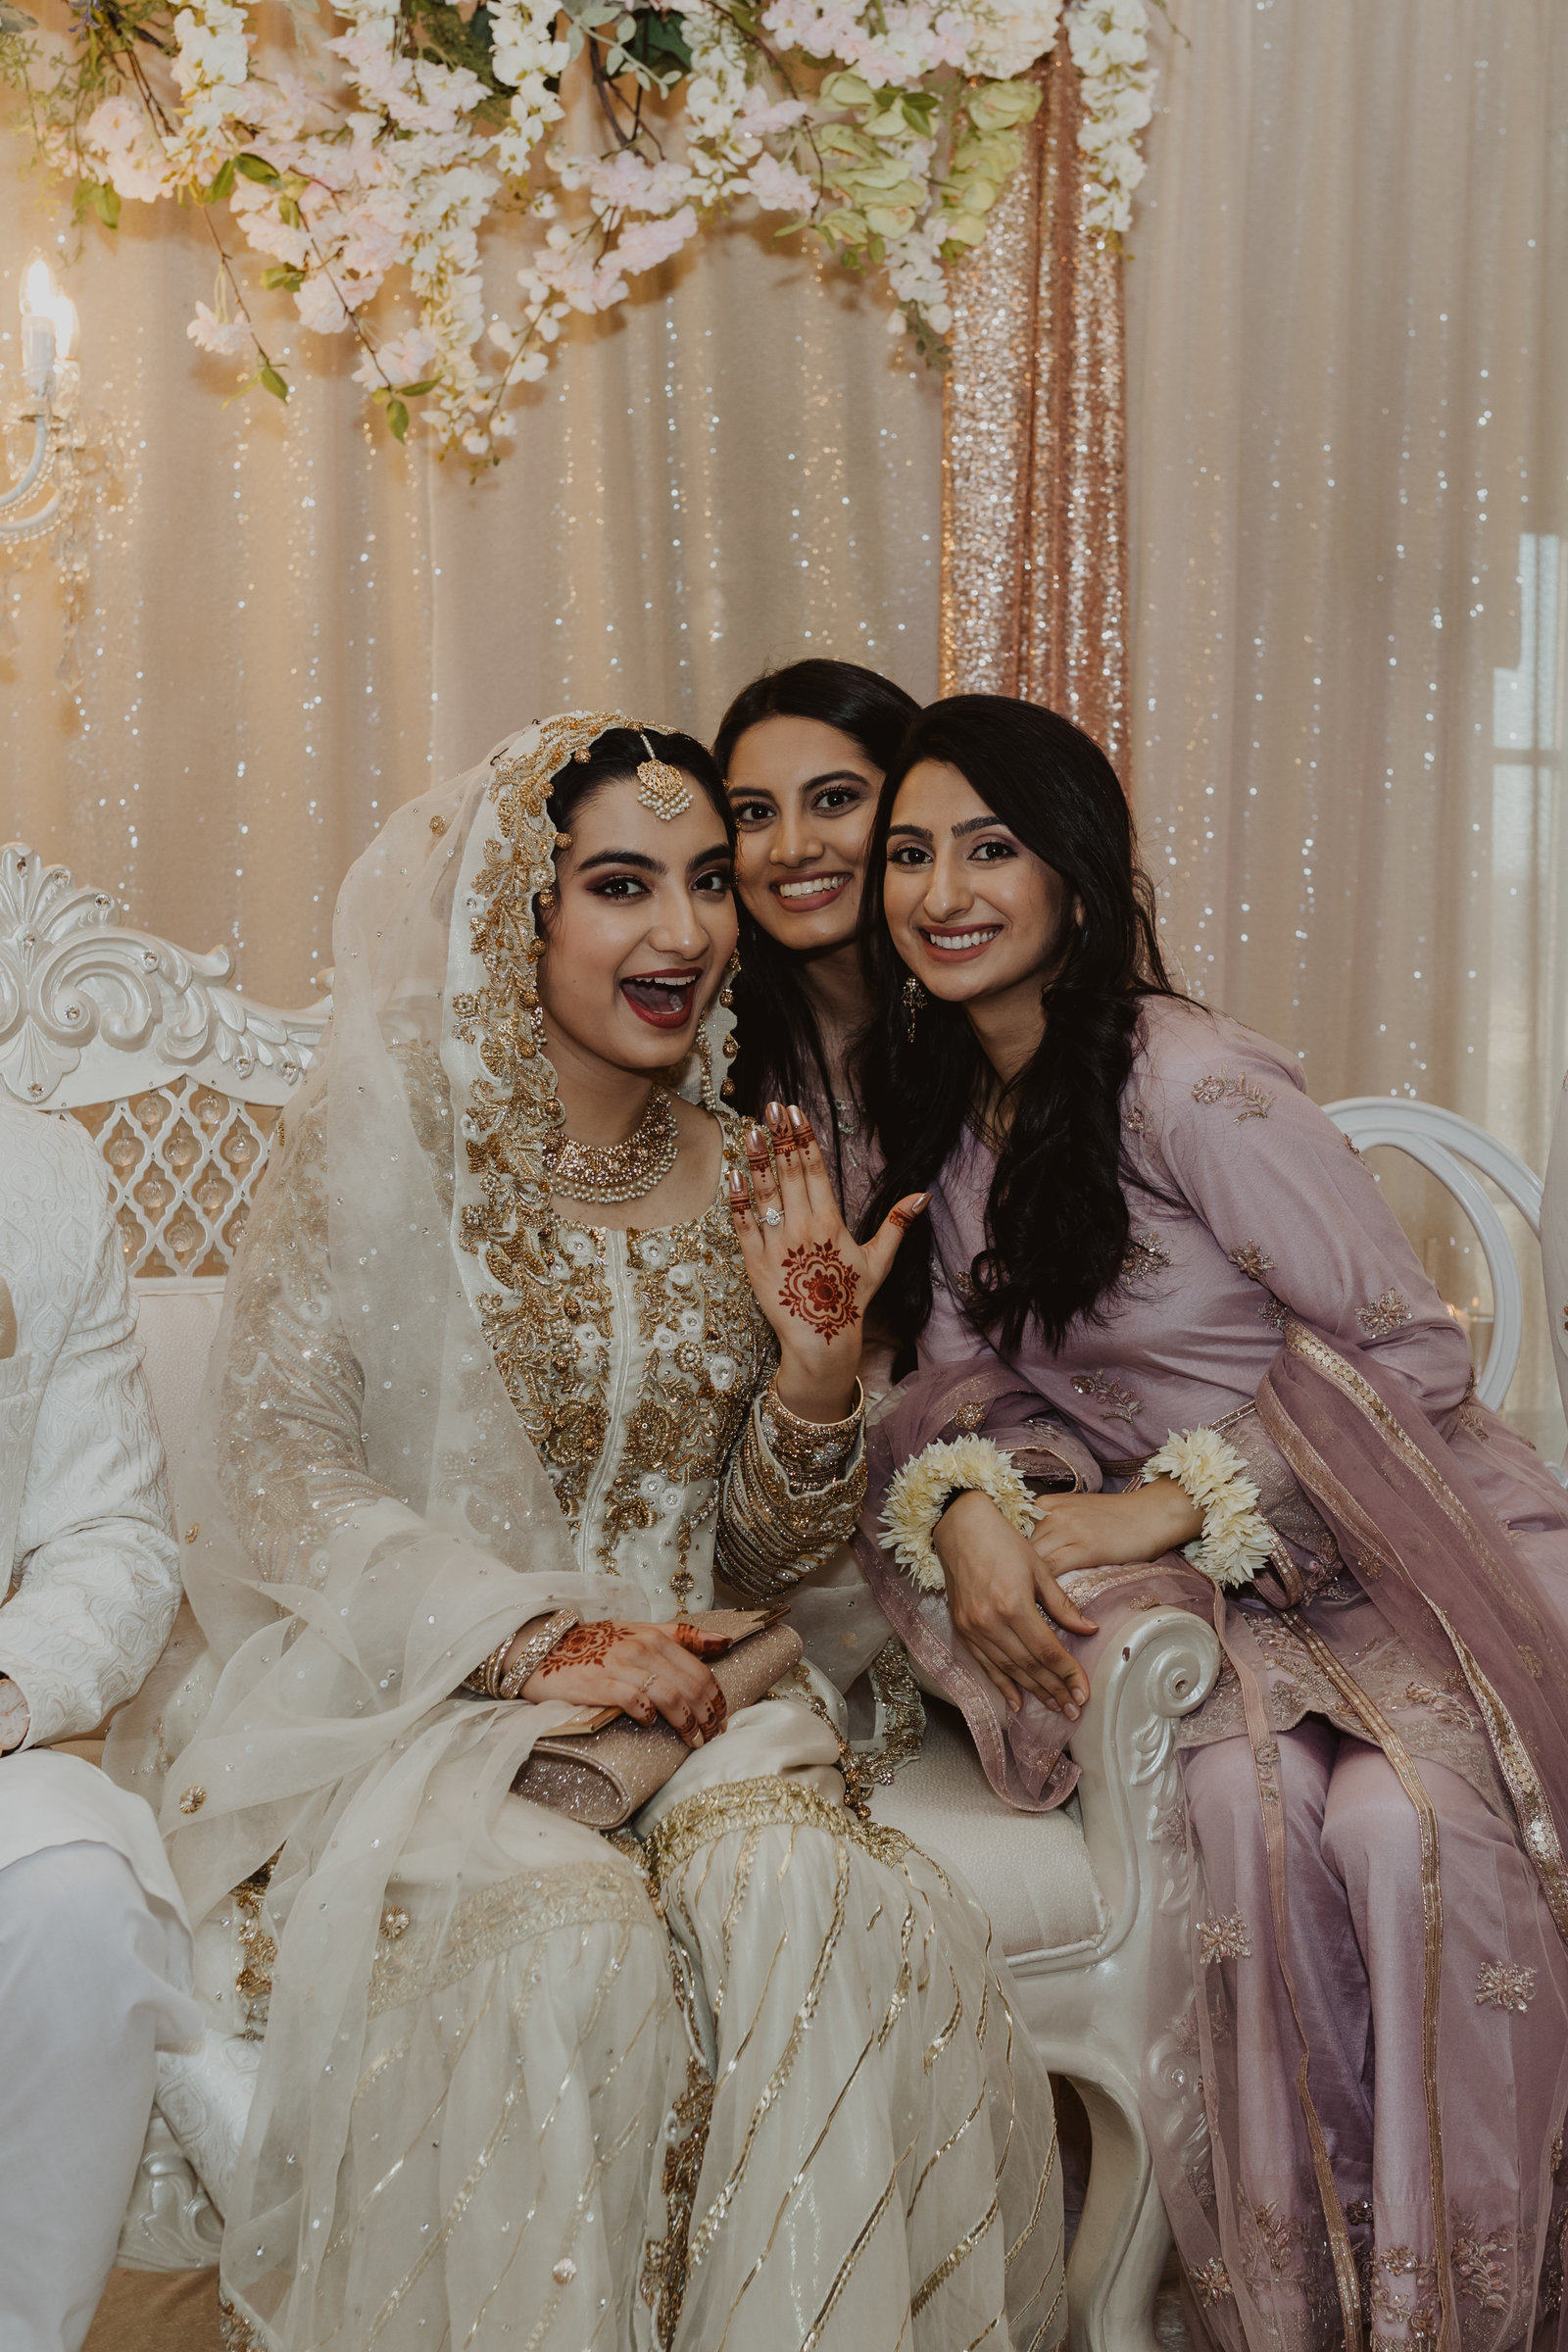 Bride Smiling with Friends